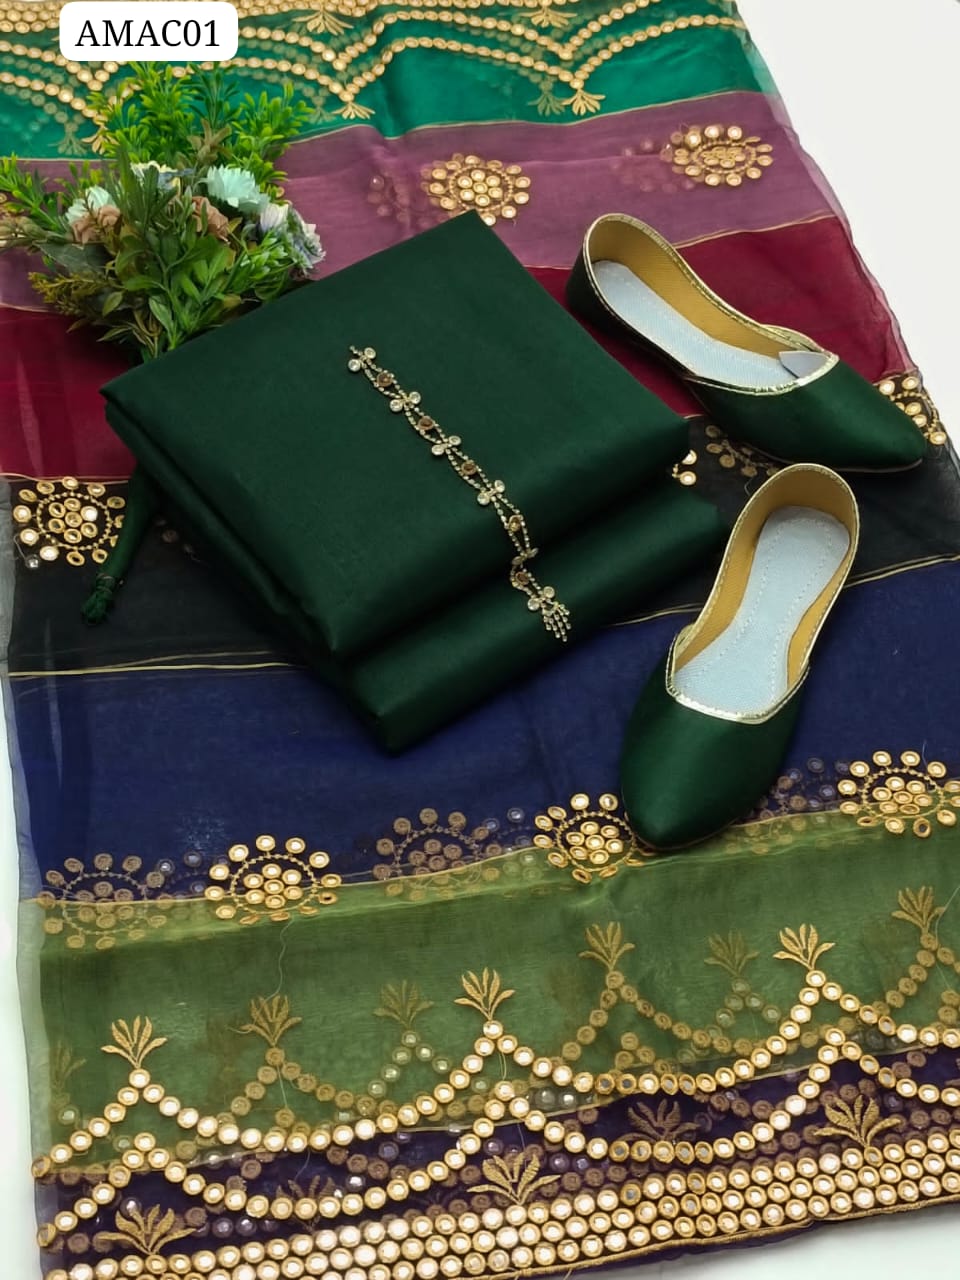 Kataan Silk Fabric Plain Shirt With Pure Multi Organza Fabric 9MM Foil & Embroidery Duppatta with 4 Sided Heavy Foil Border And Kataan Silk Plain Trouser 3 Pc Dress With Neckline & Khussa Gift